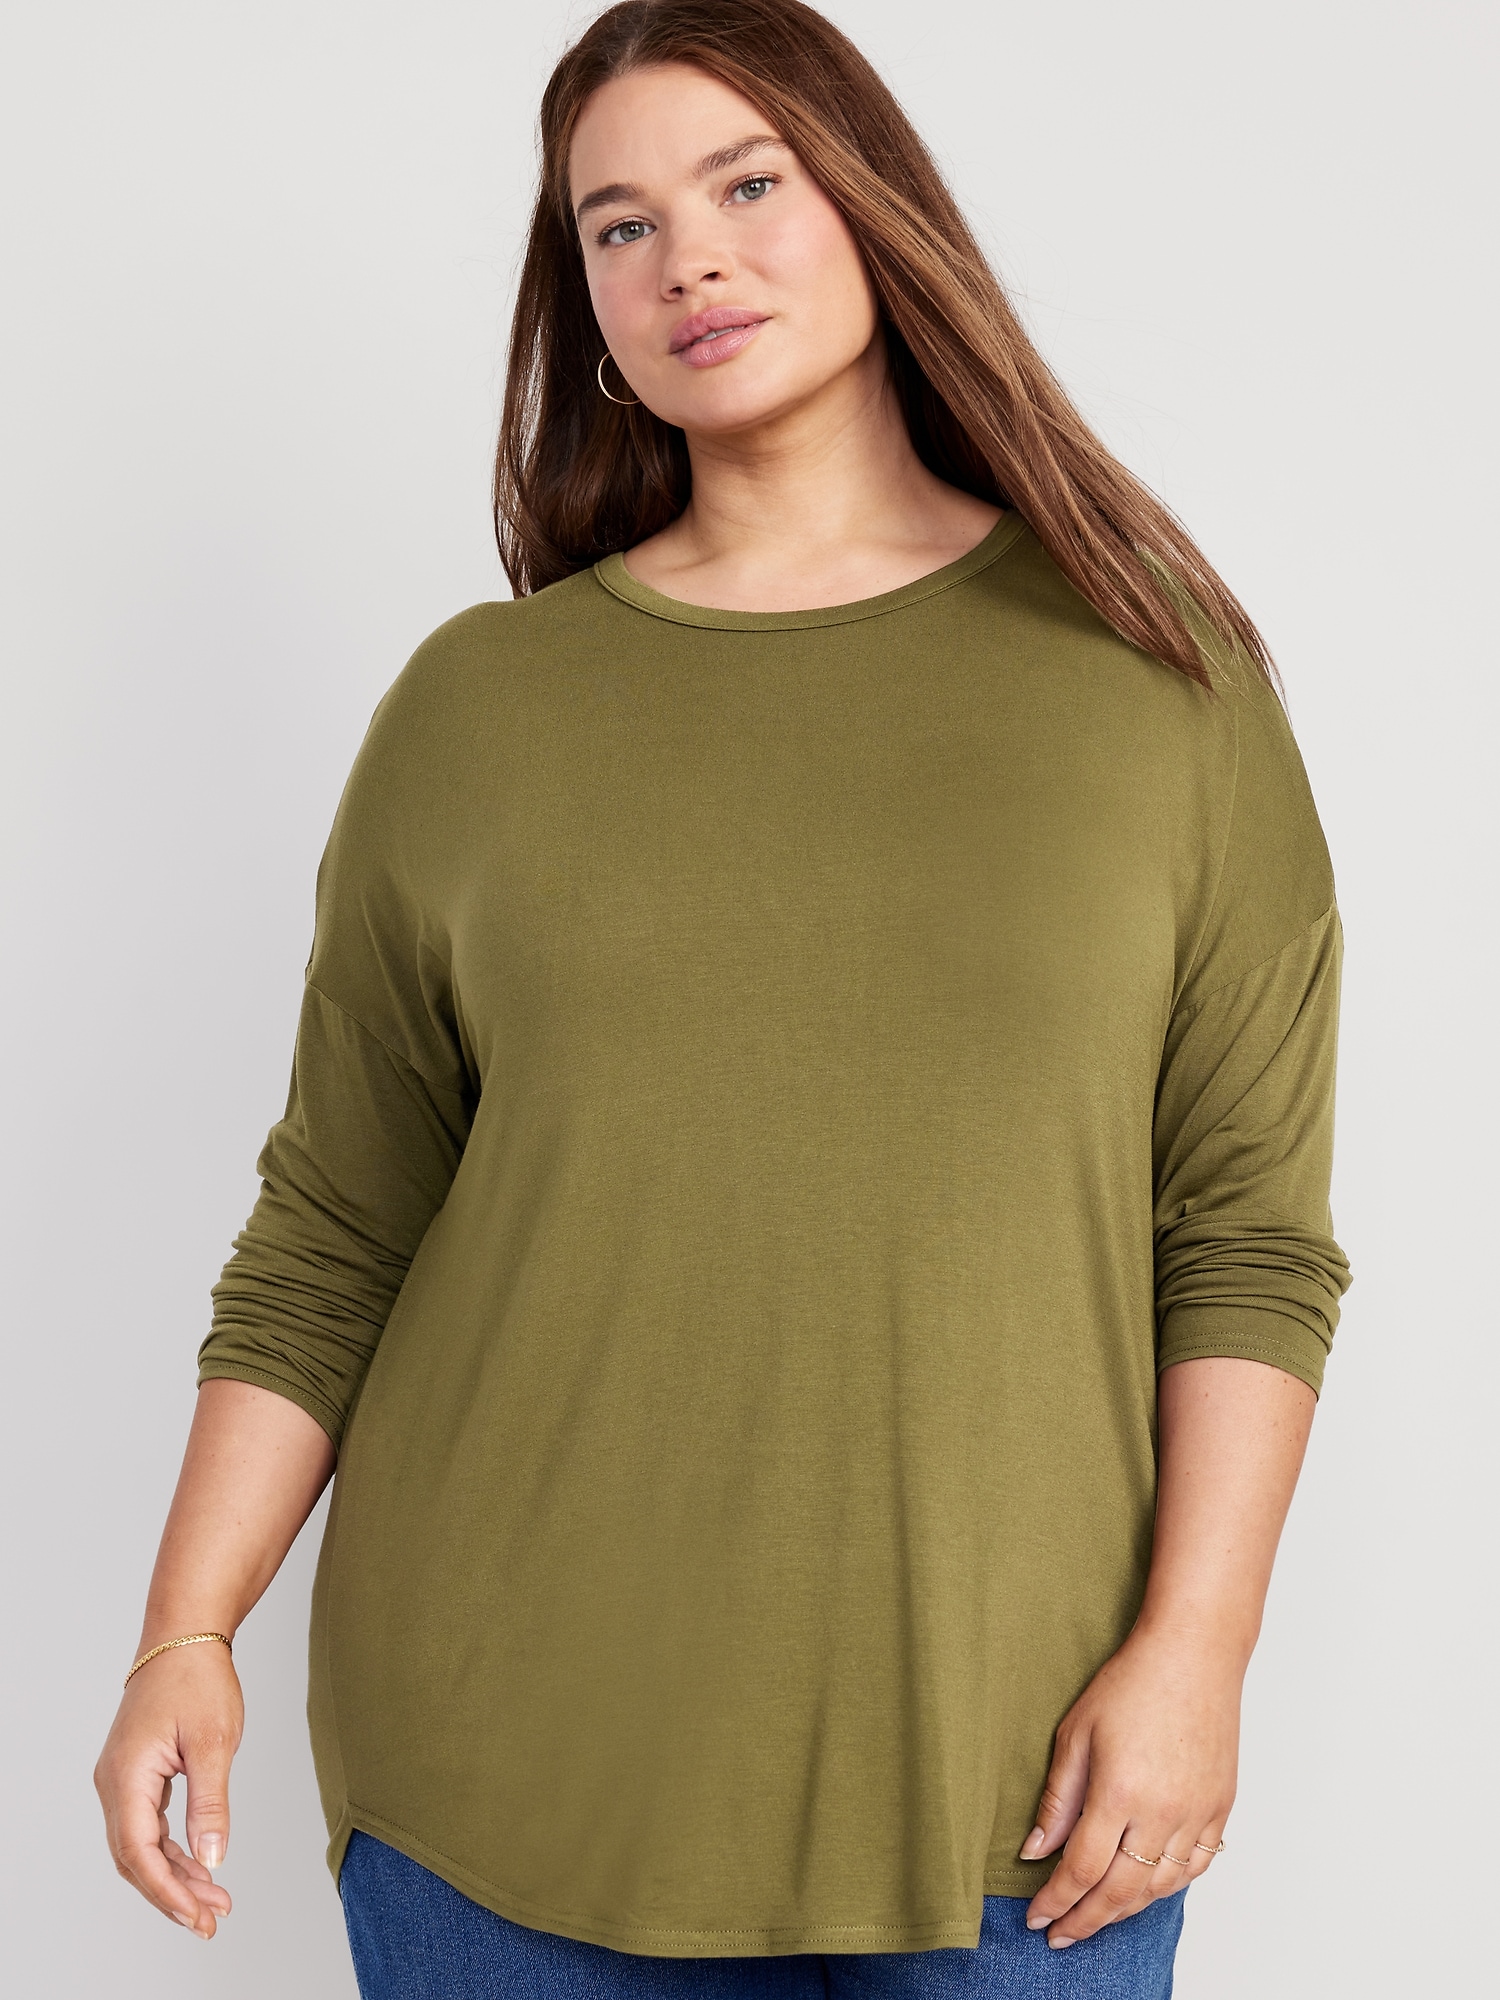 Luxe Long-Sleeve Tunic T-Shirt for Women | Old Navy